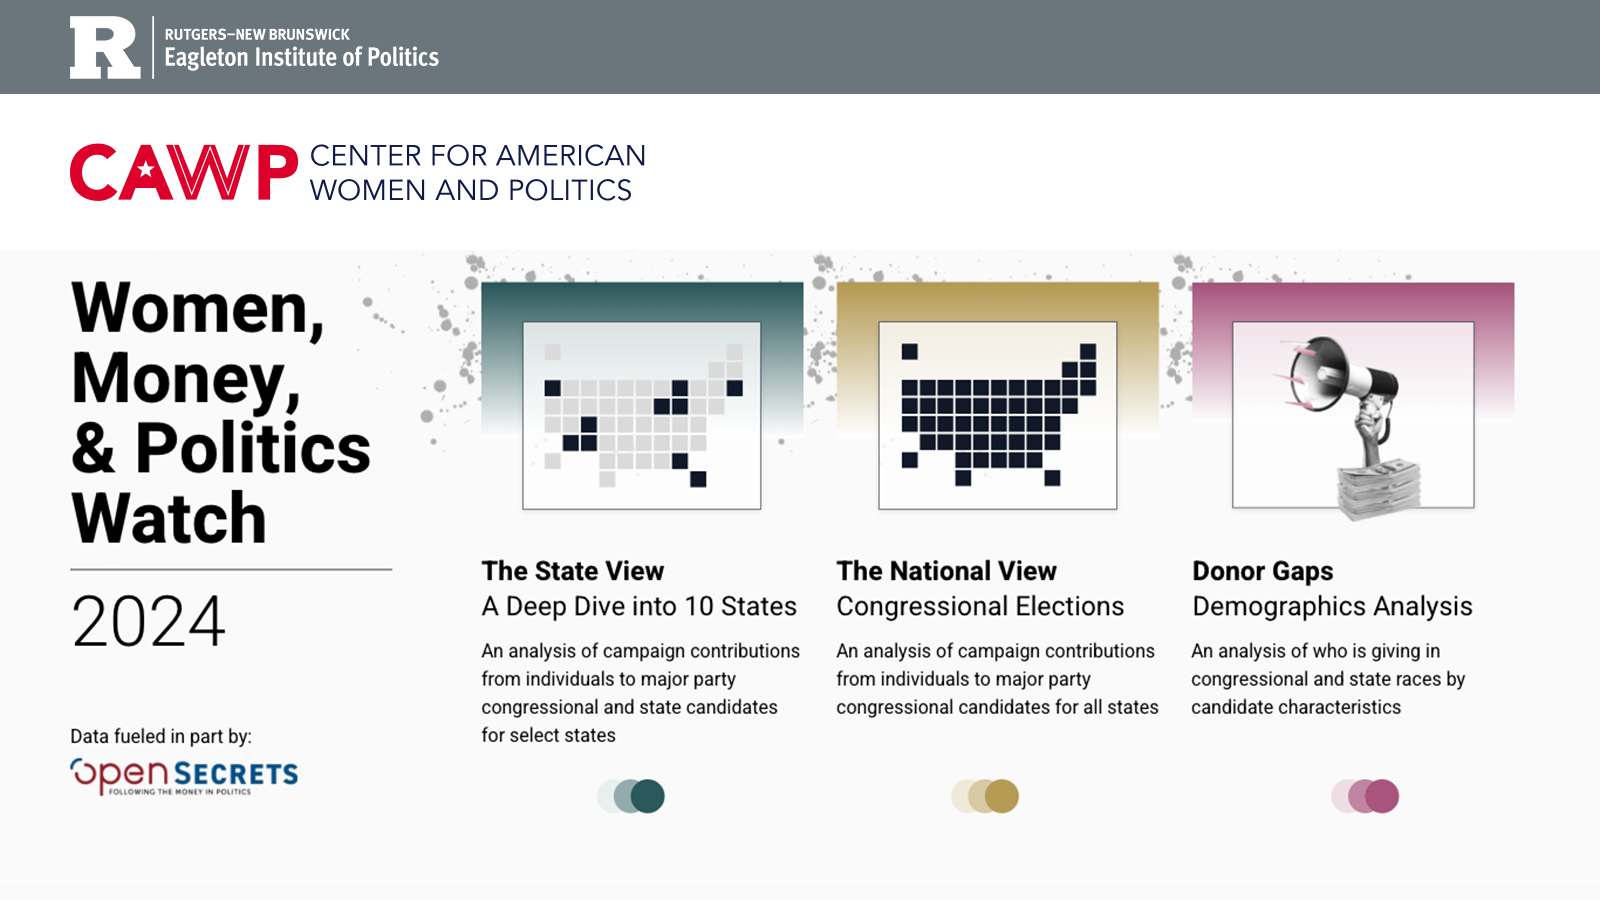 The landing page of the project 'Women, Money, and Politics Watch 2024' provides convenient portals to the three core pages, along with information on when major data updates occur. It was designed by Graphicacy for Rutgers University's Center for American Women and Politics.